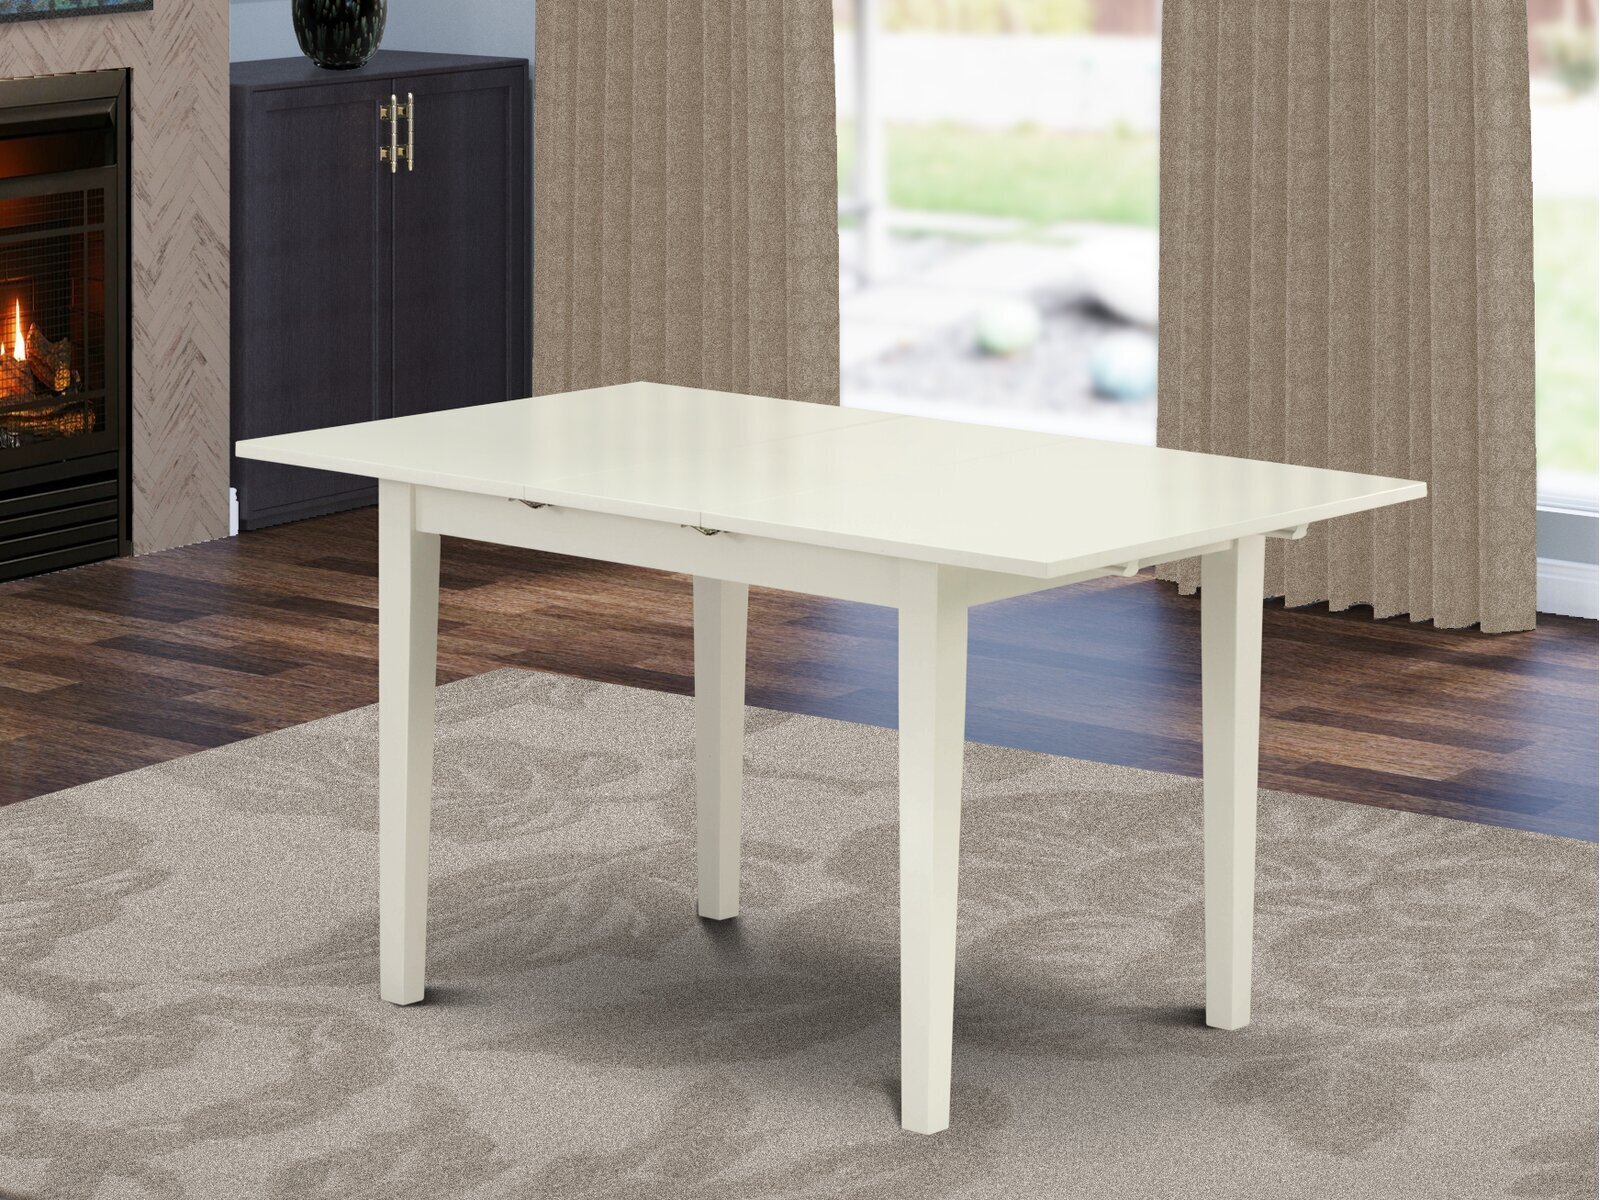 Classy butterfly leaf dining table for small spaces